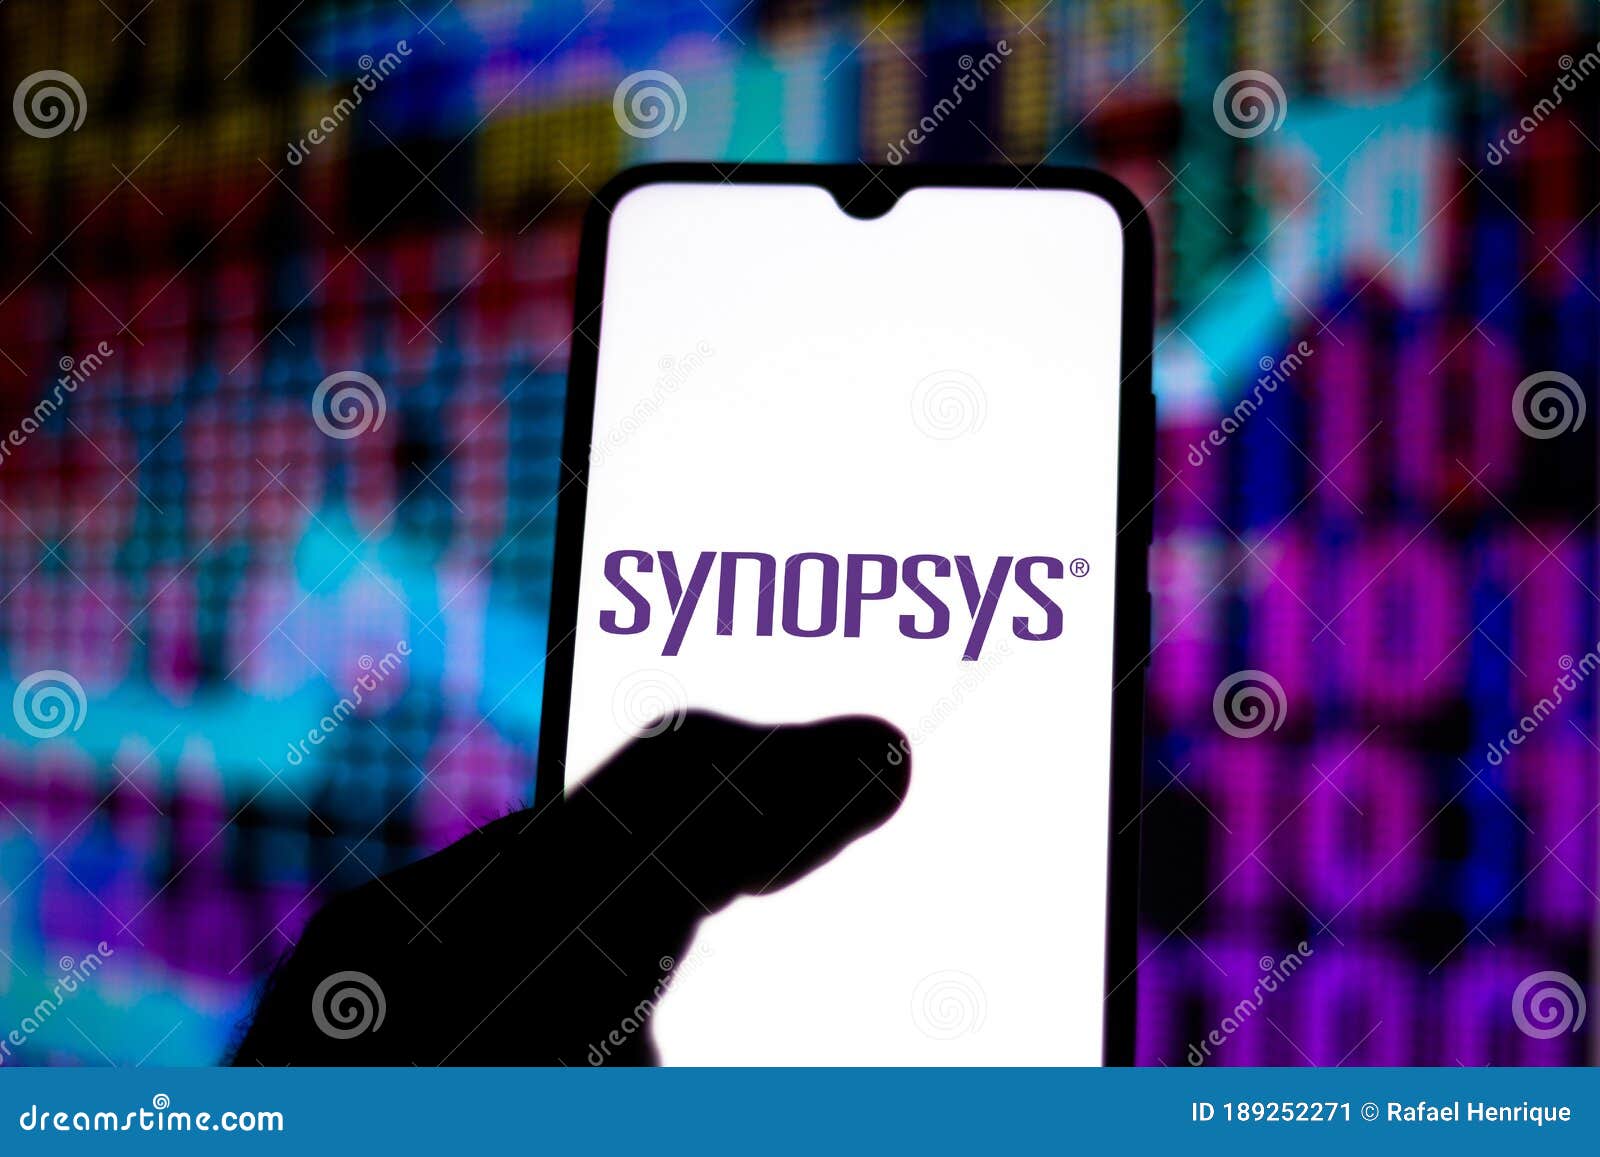 Sassine Ghazi will be the new CEO and President of Synopsys - CEOWORLD  magazine